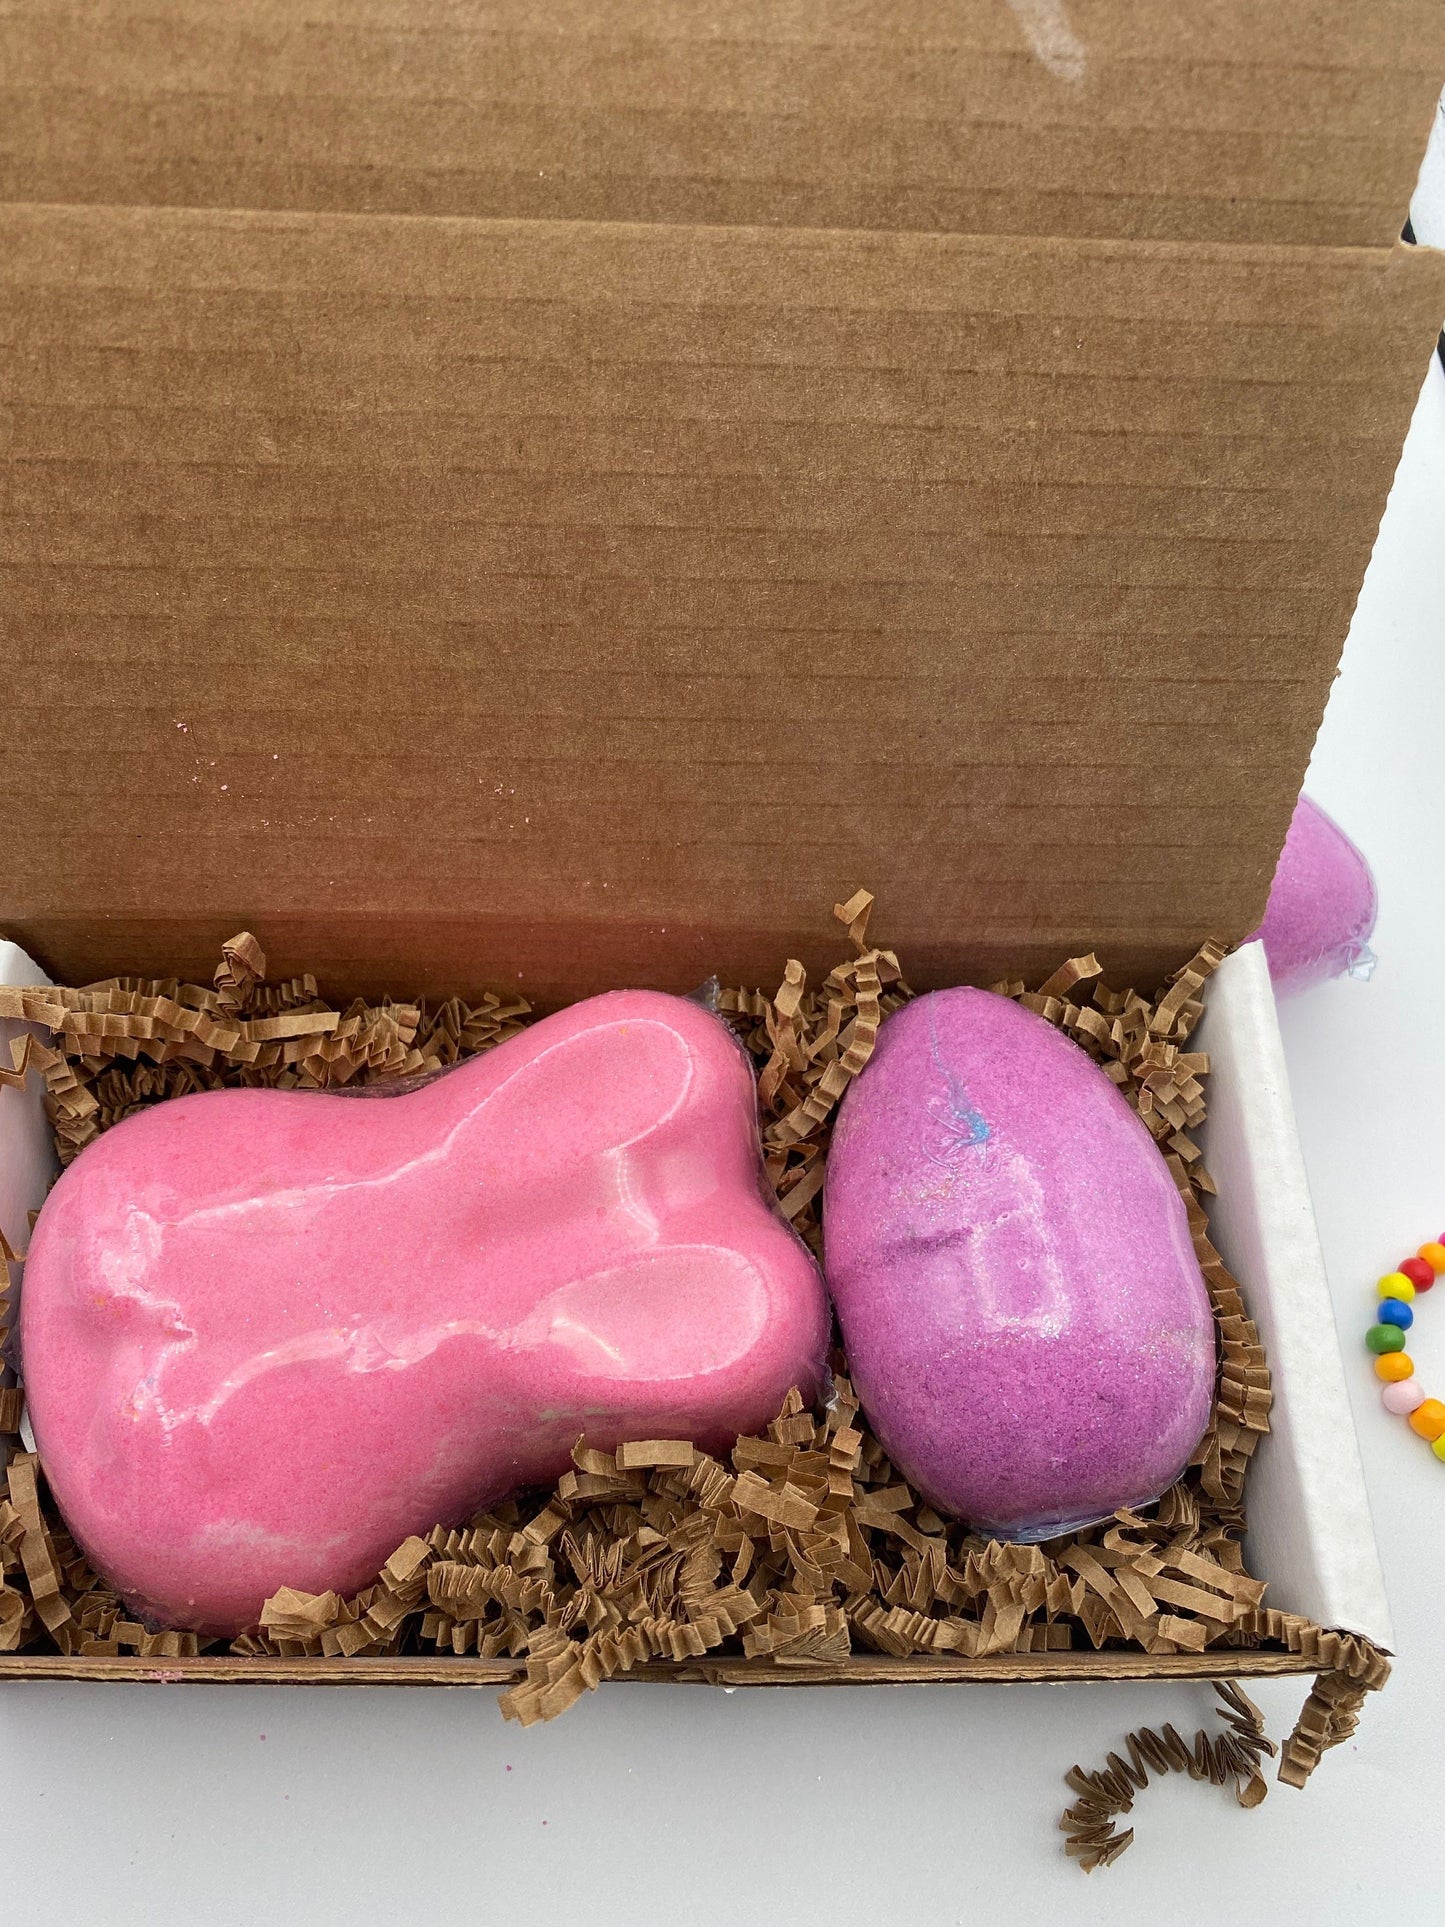 Bunny and Egg Bath Bombs with Toy Jewelry Inside